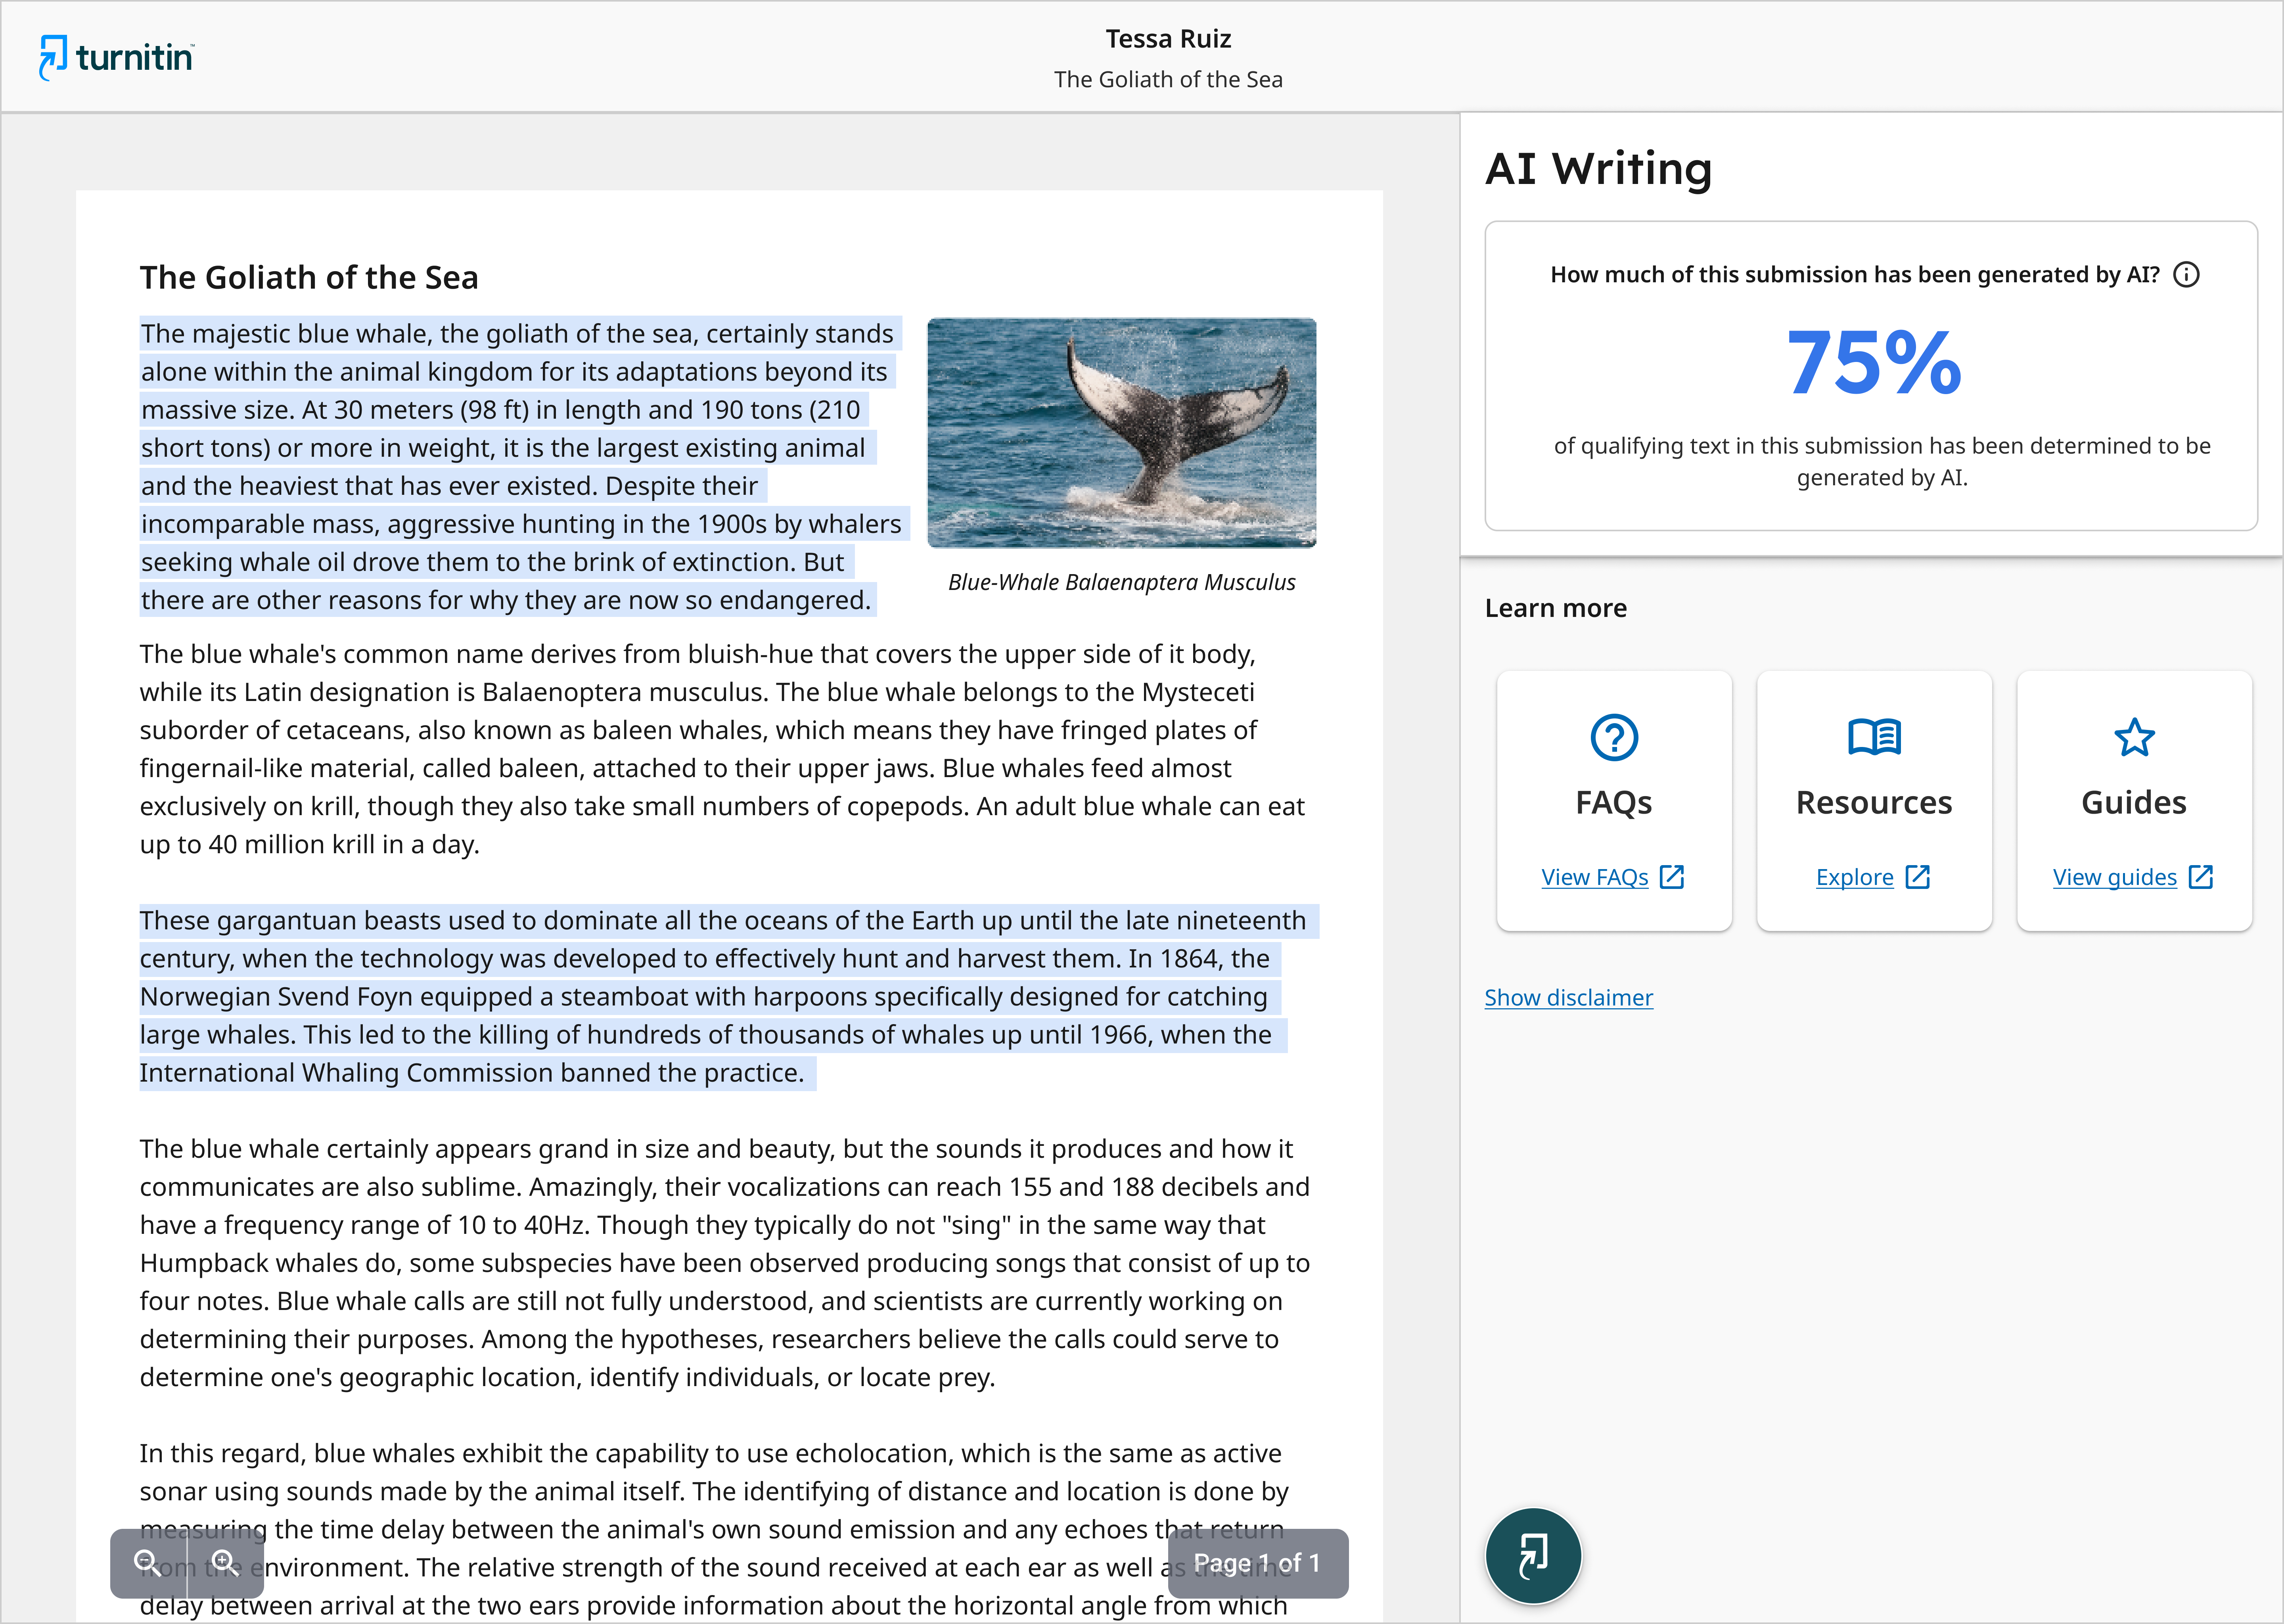 ai essay writer not detected